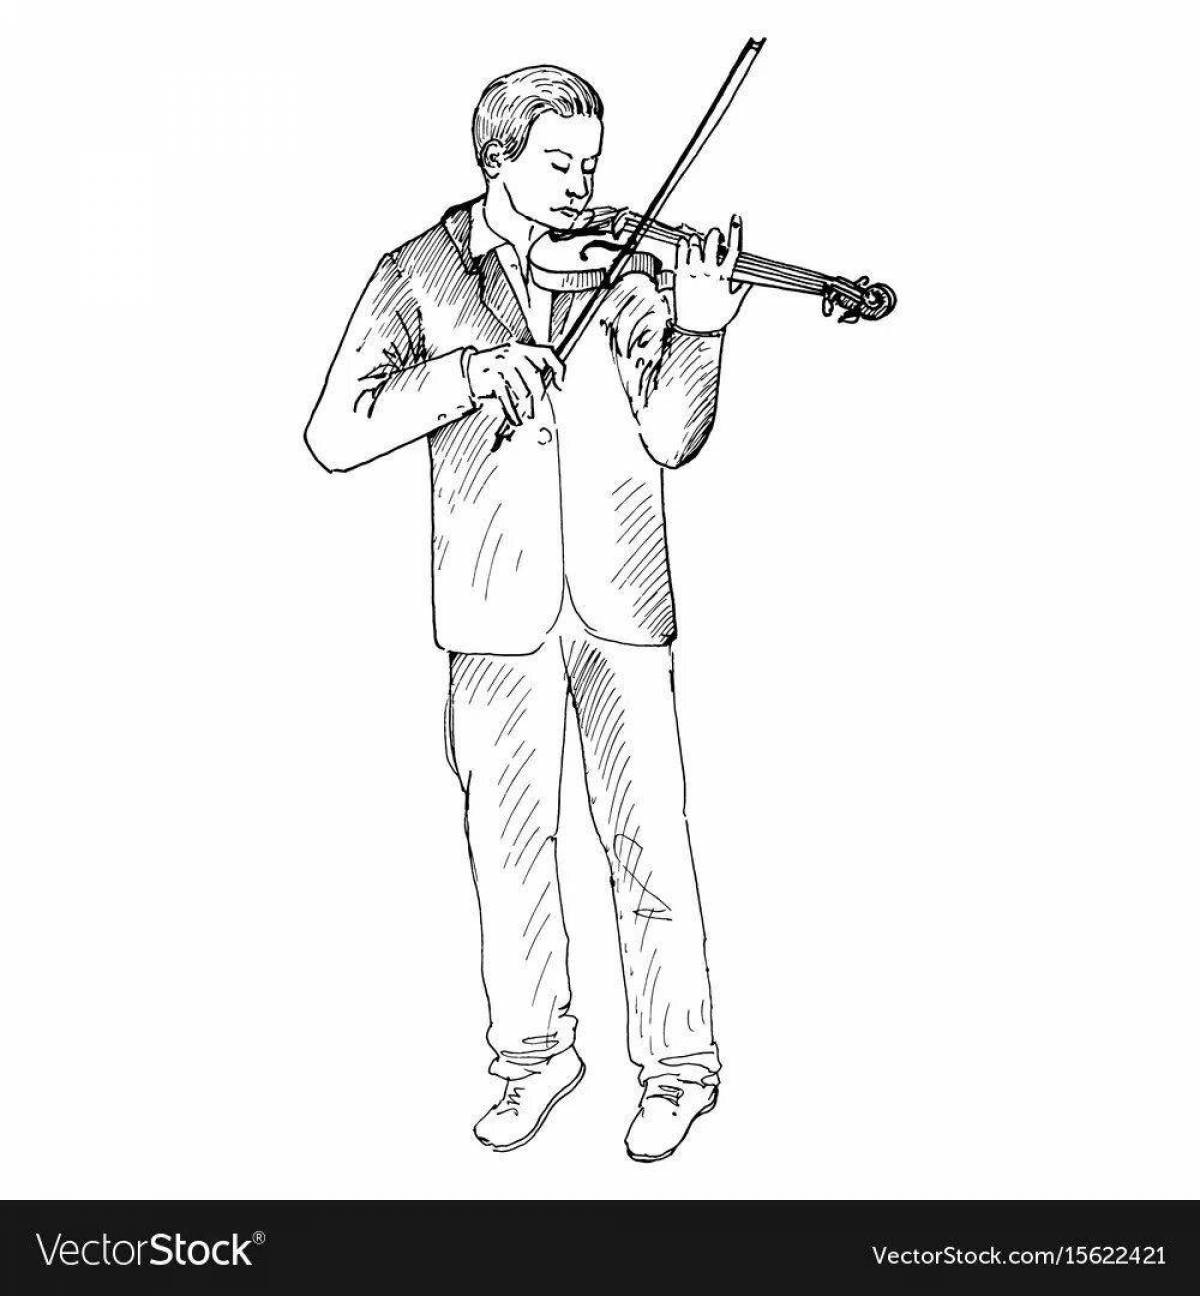 Playful coloring boy with violin